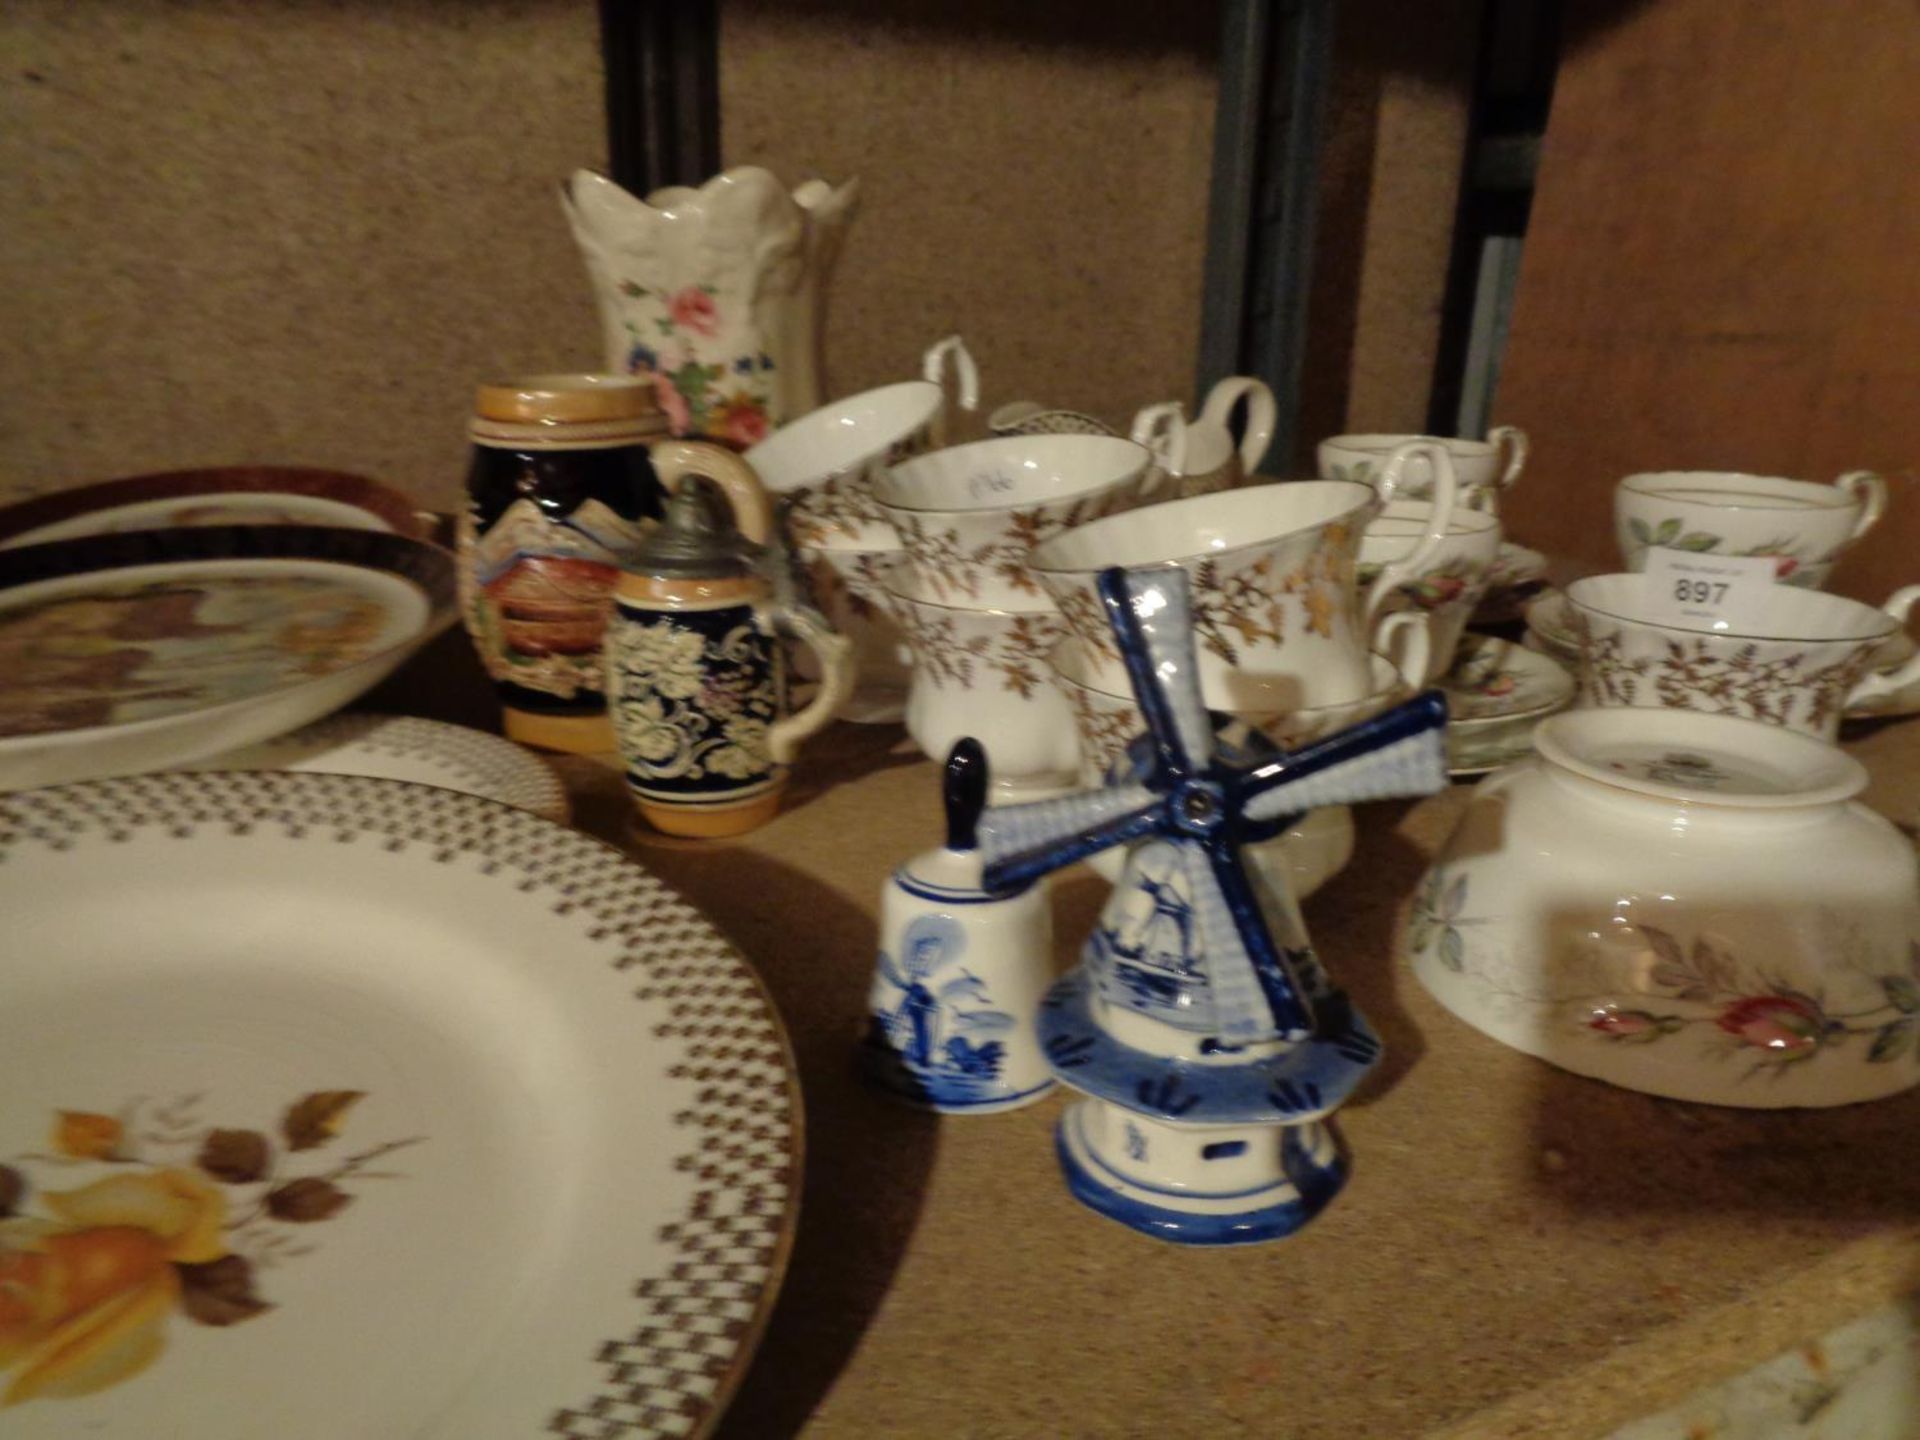 A SELECTION OF CHINA TEA WARE PARAGON 'BRIDAL ROSE', DECORATIVE PLATES, BLUE AND WHITE ETC - Image 2 of 4